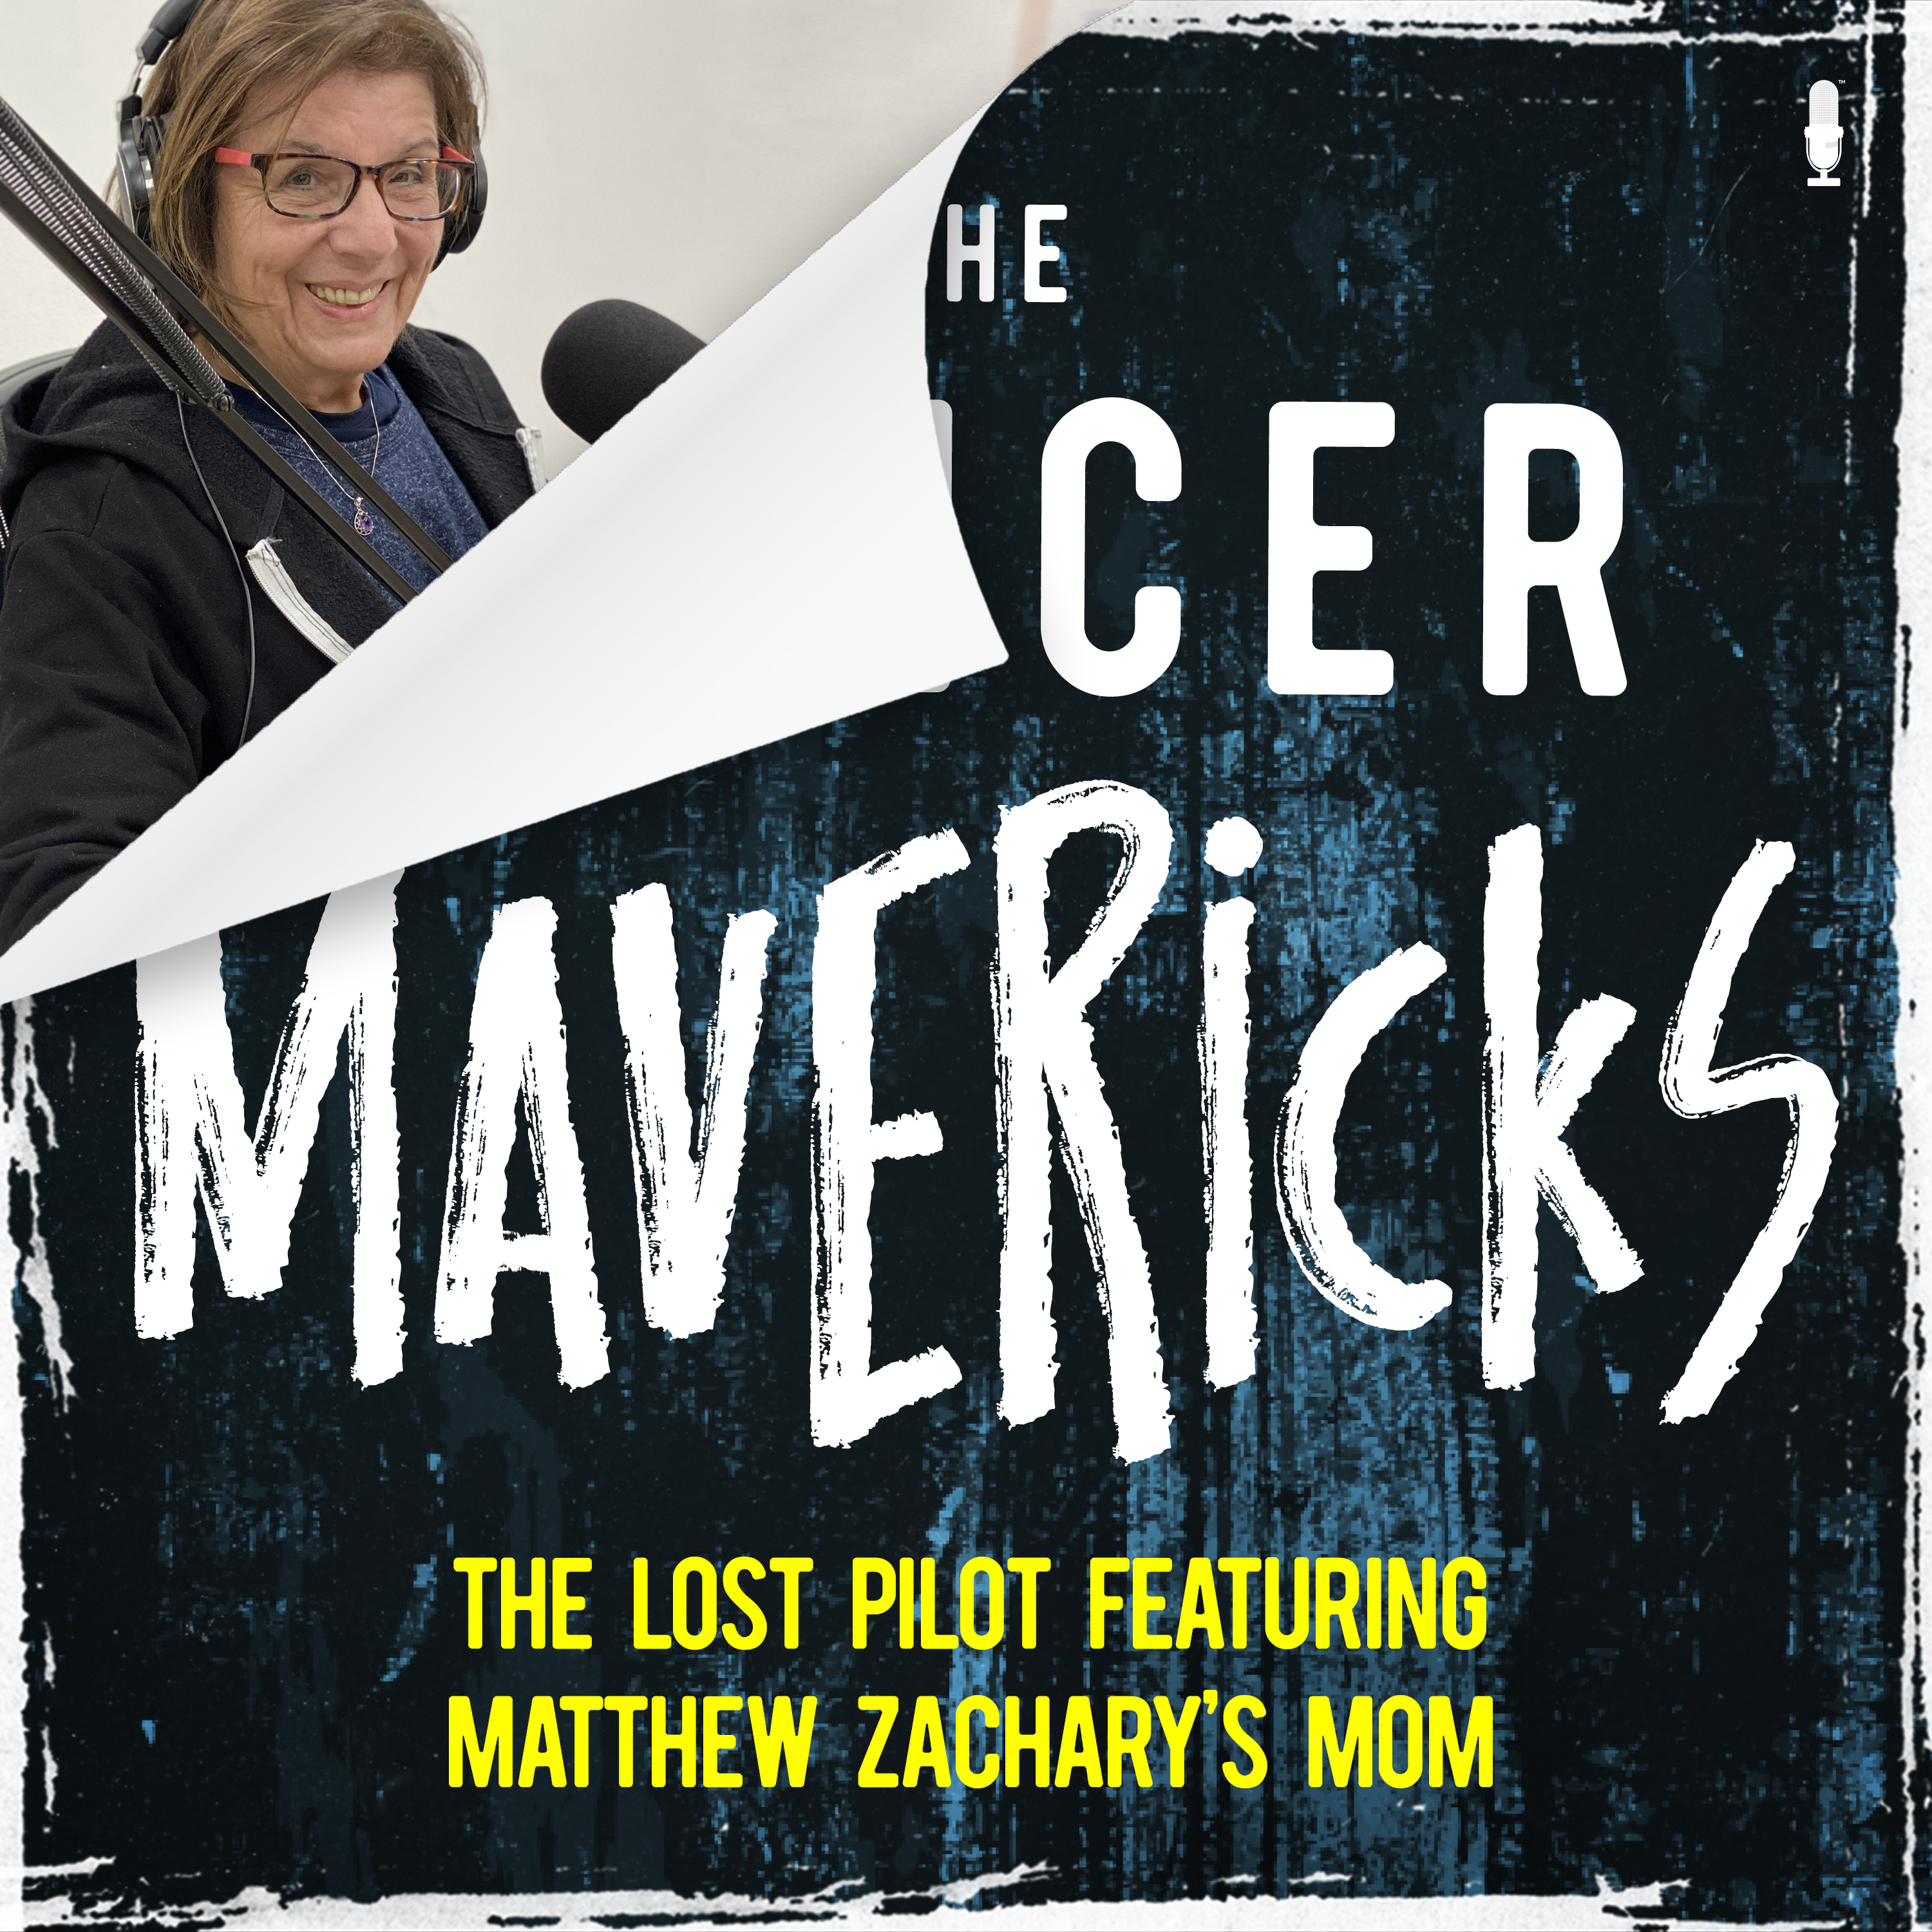 The Lost Pilot of The Cancer Mavericks with MZ’s Mom!